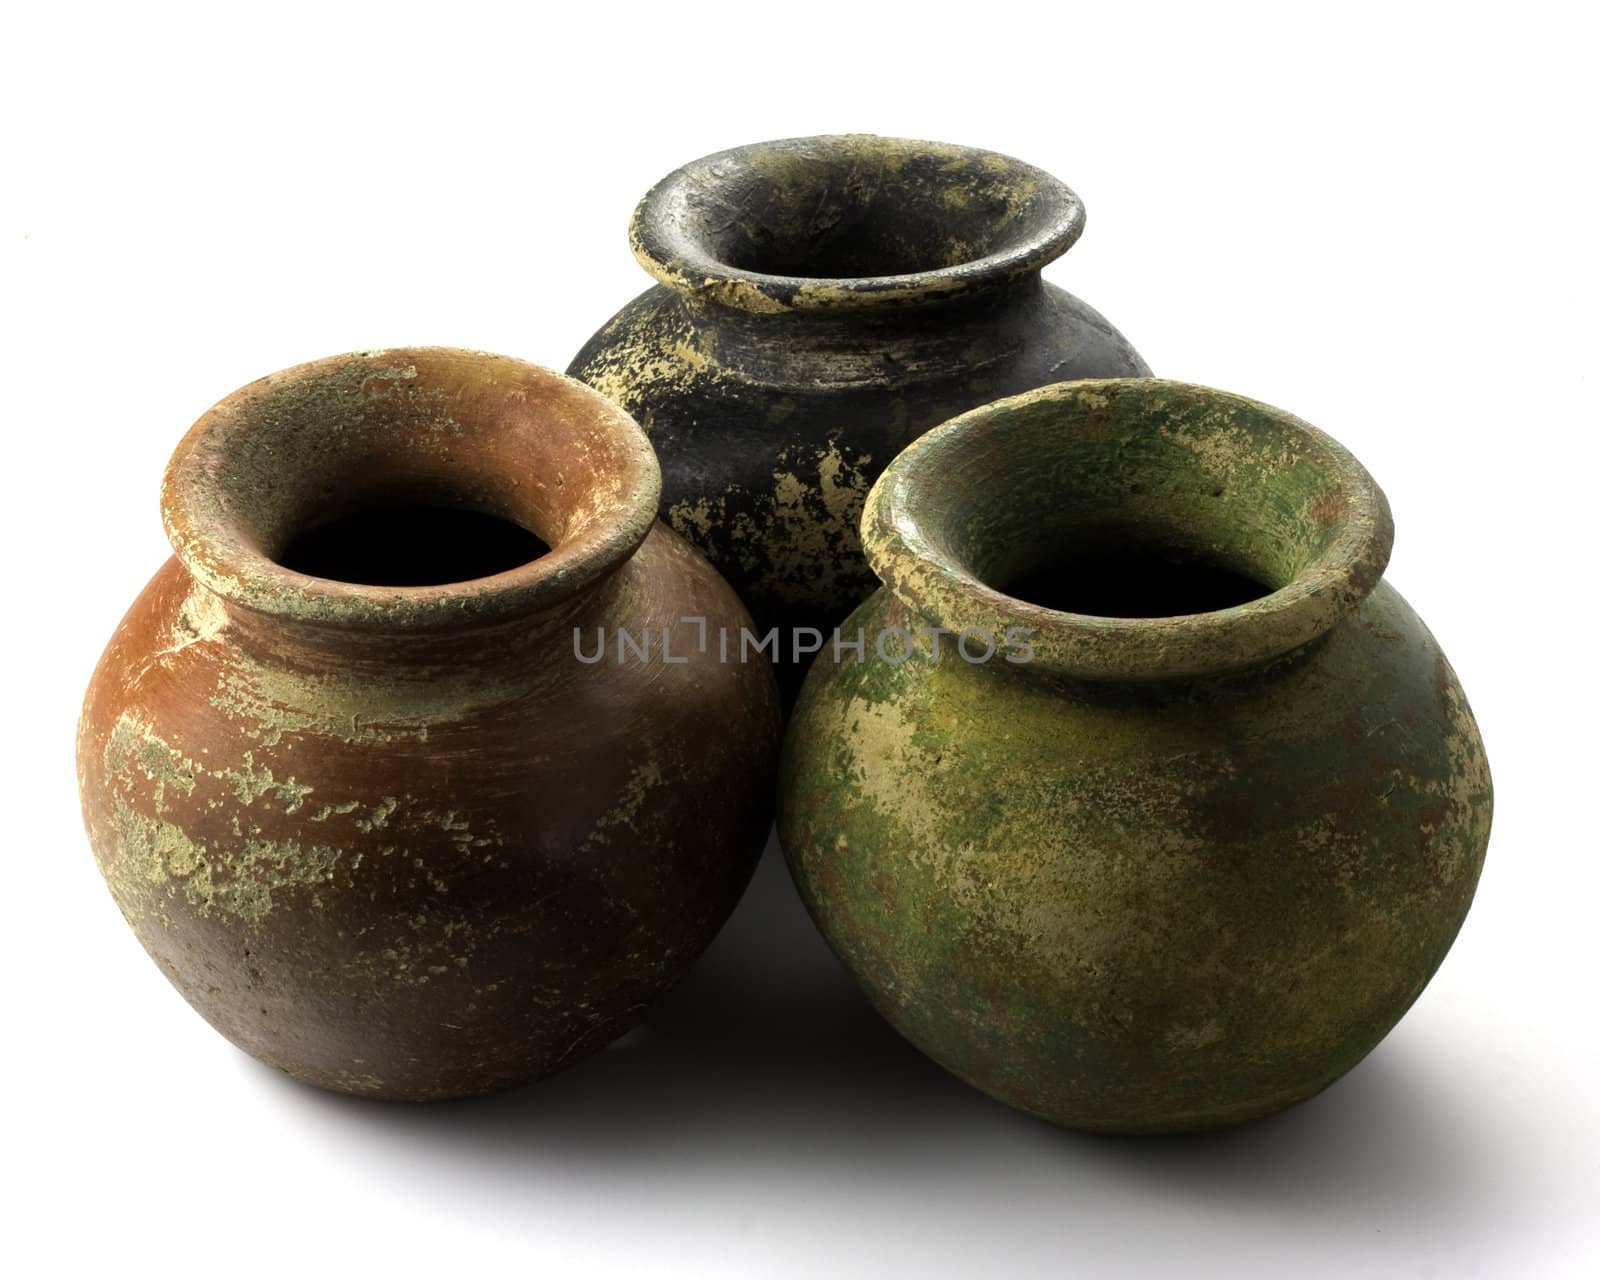 three small plant clay pots (mass produced planters) with rough, red, green, black and yellow finish on white background